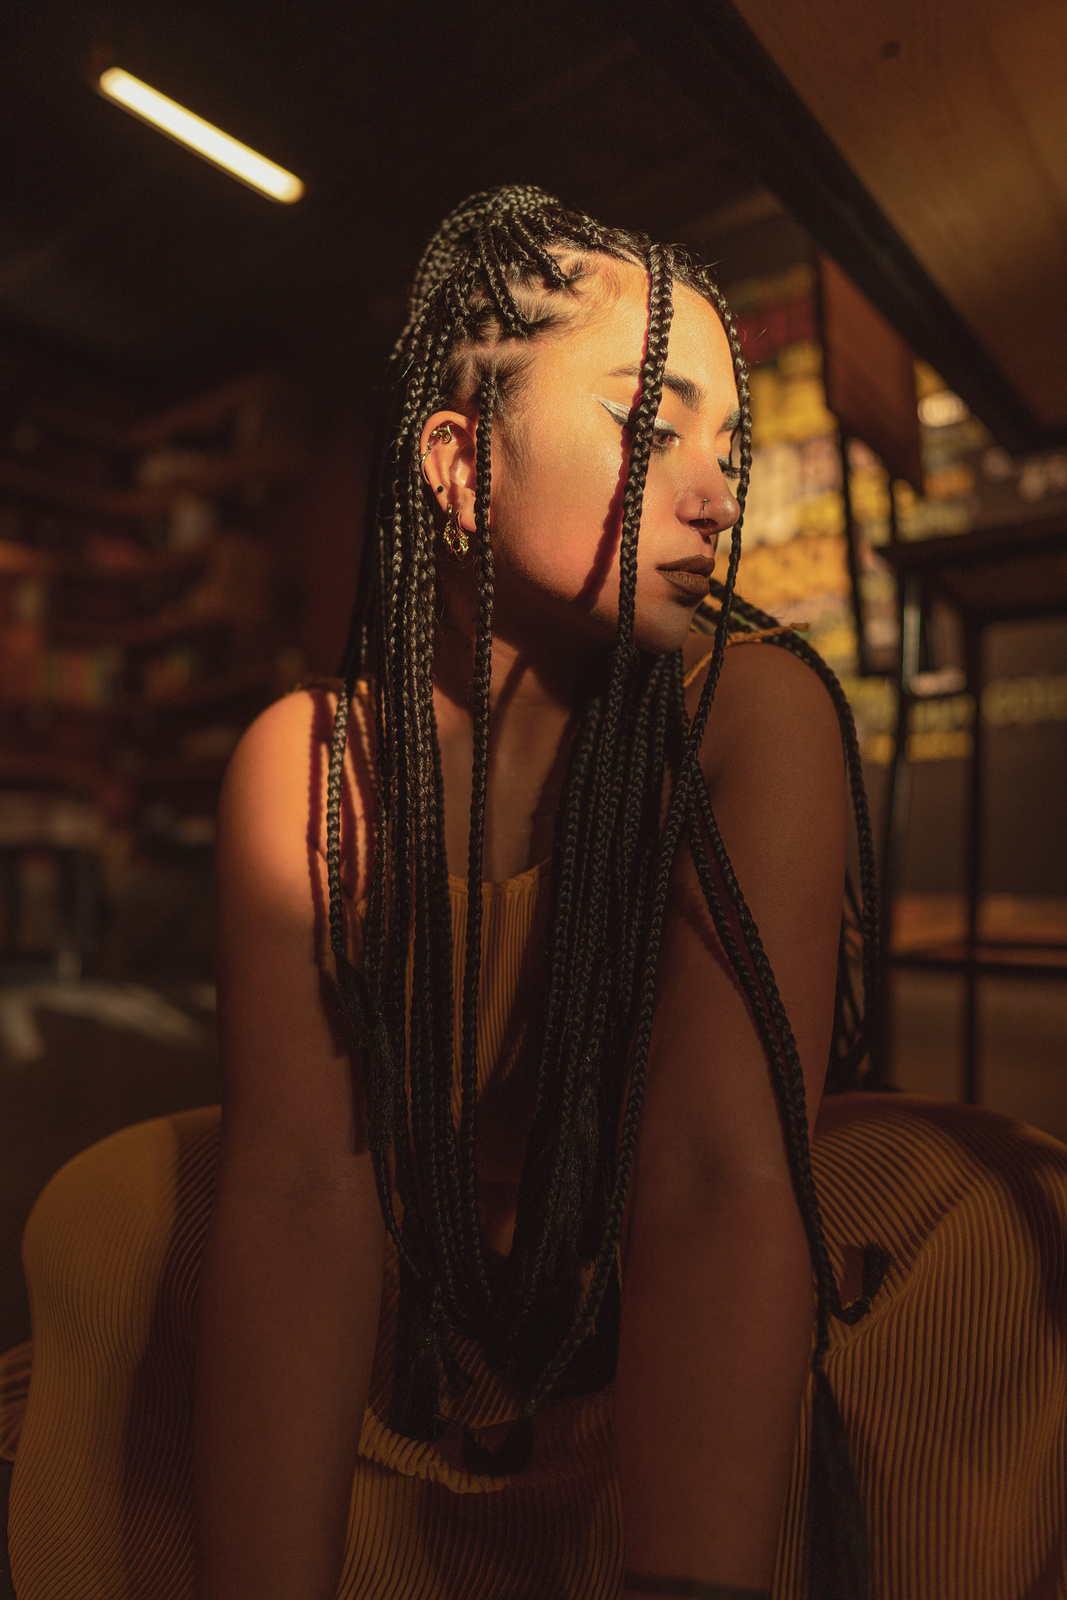 A Woman with Braids Hairstyle